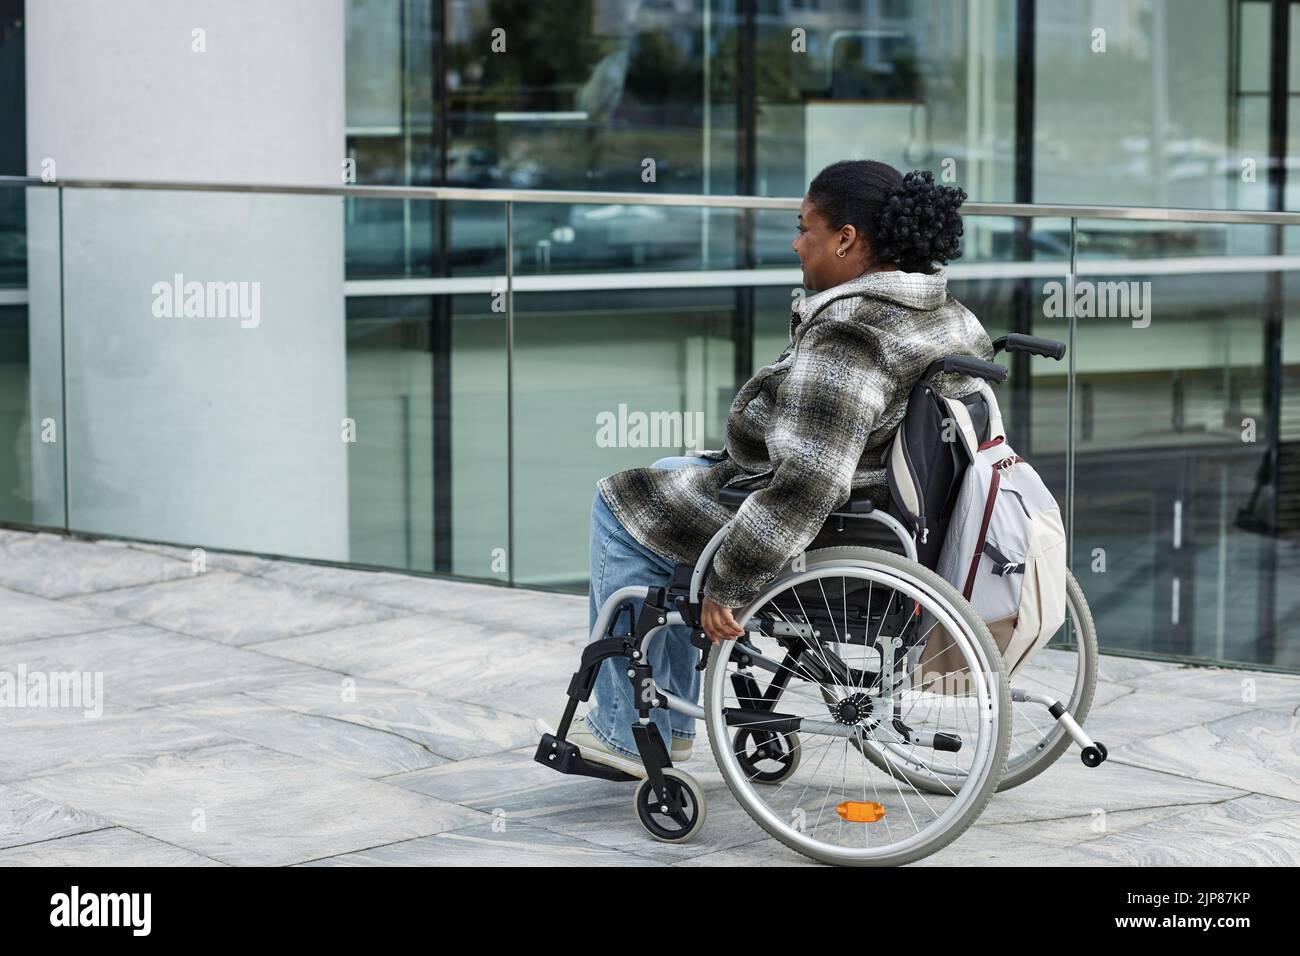 Full length shot of adult black woman in wheelchair commuting in city setting, copy space Stock Photo